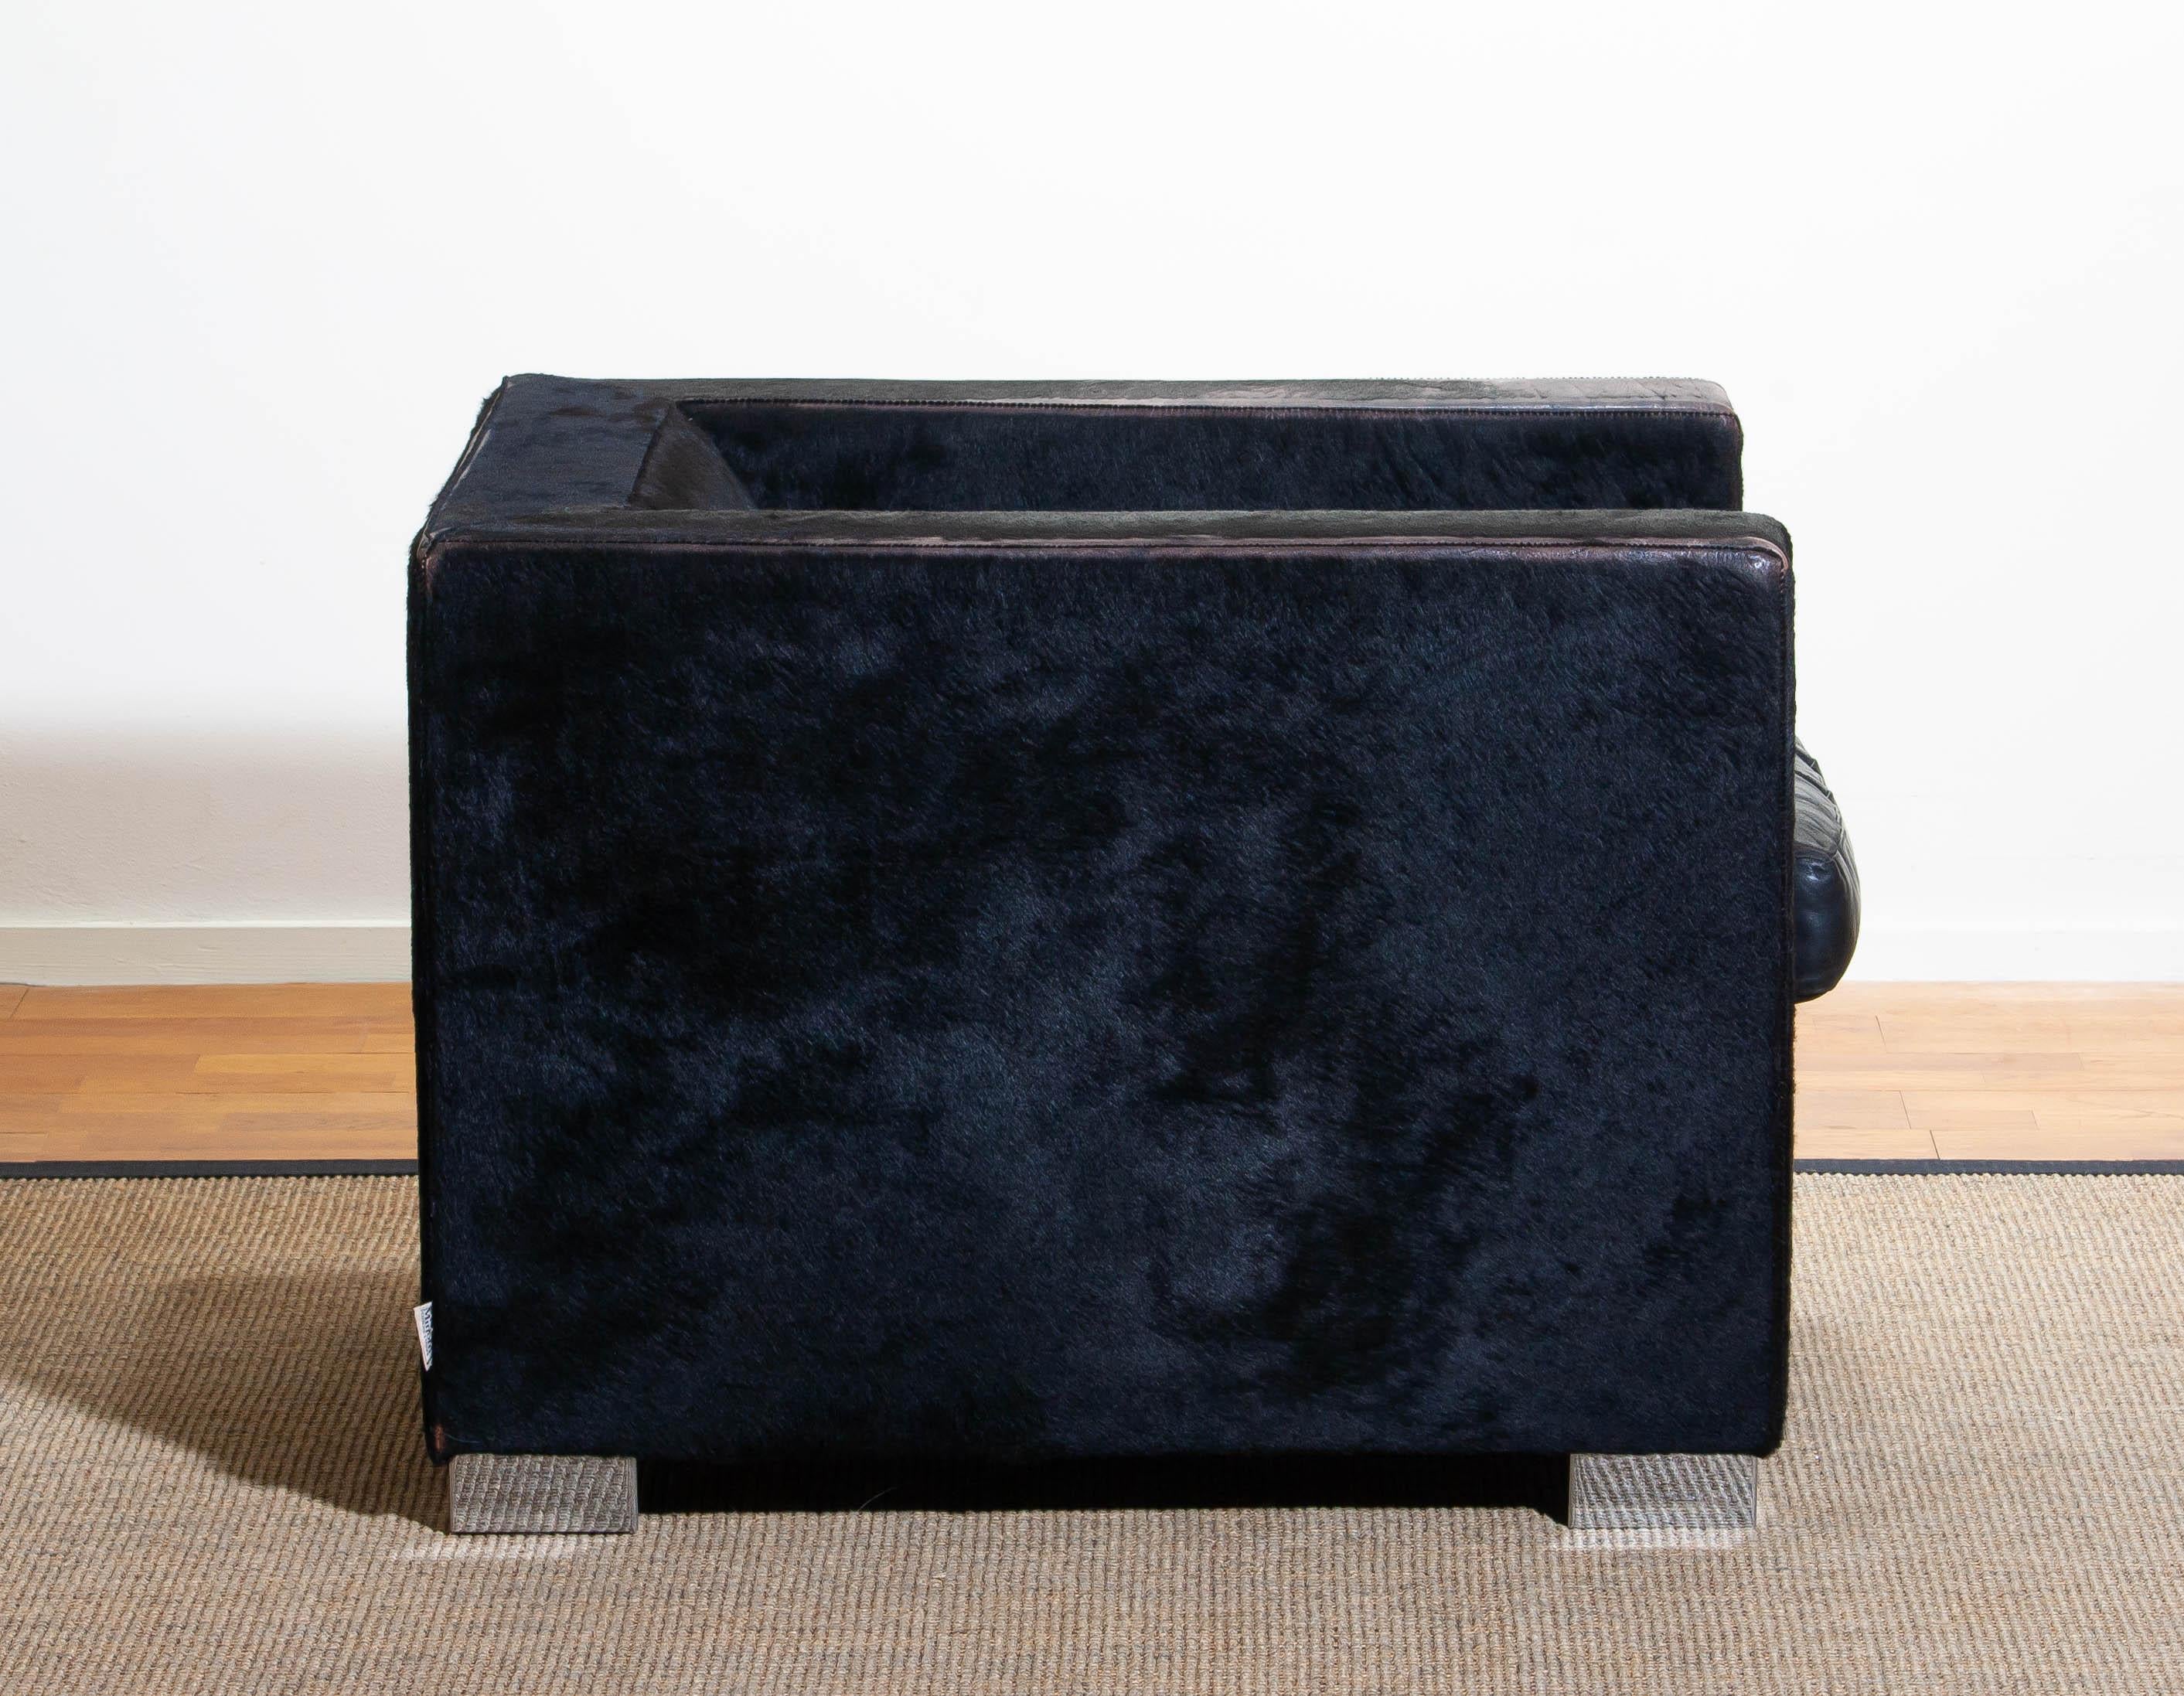 Late 20th Century 1990s, Black Lounge Chair in Pony Coat Leather by Rodolfo Dordoni for Minotti